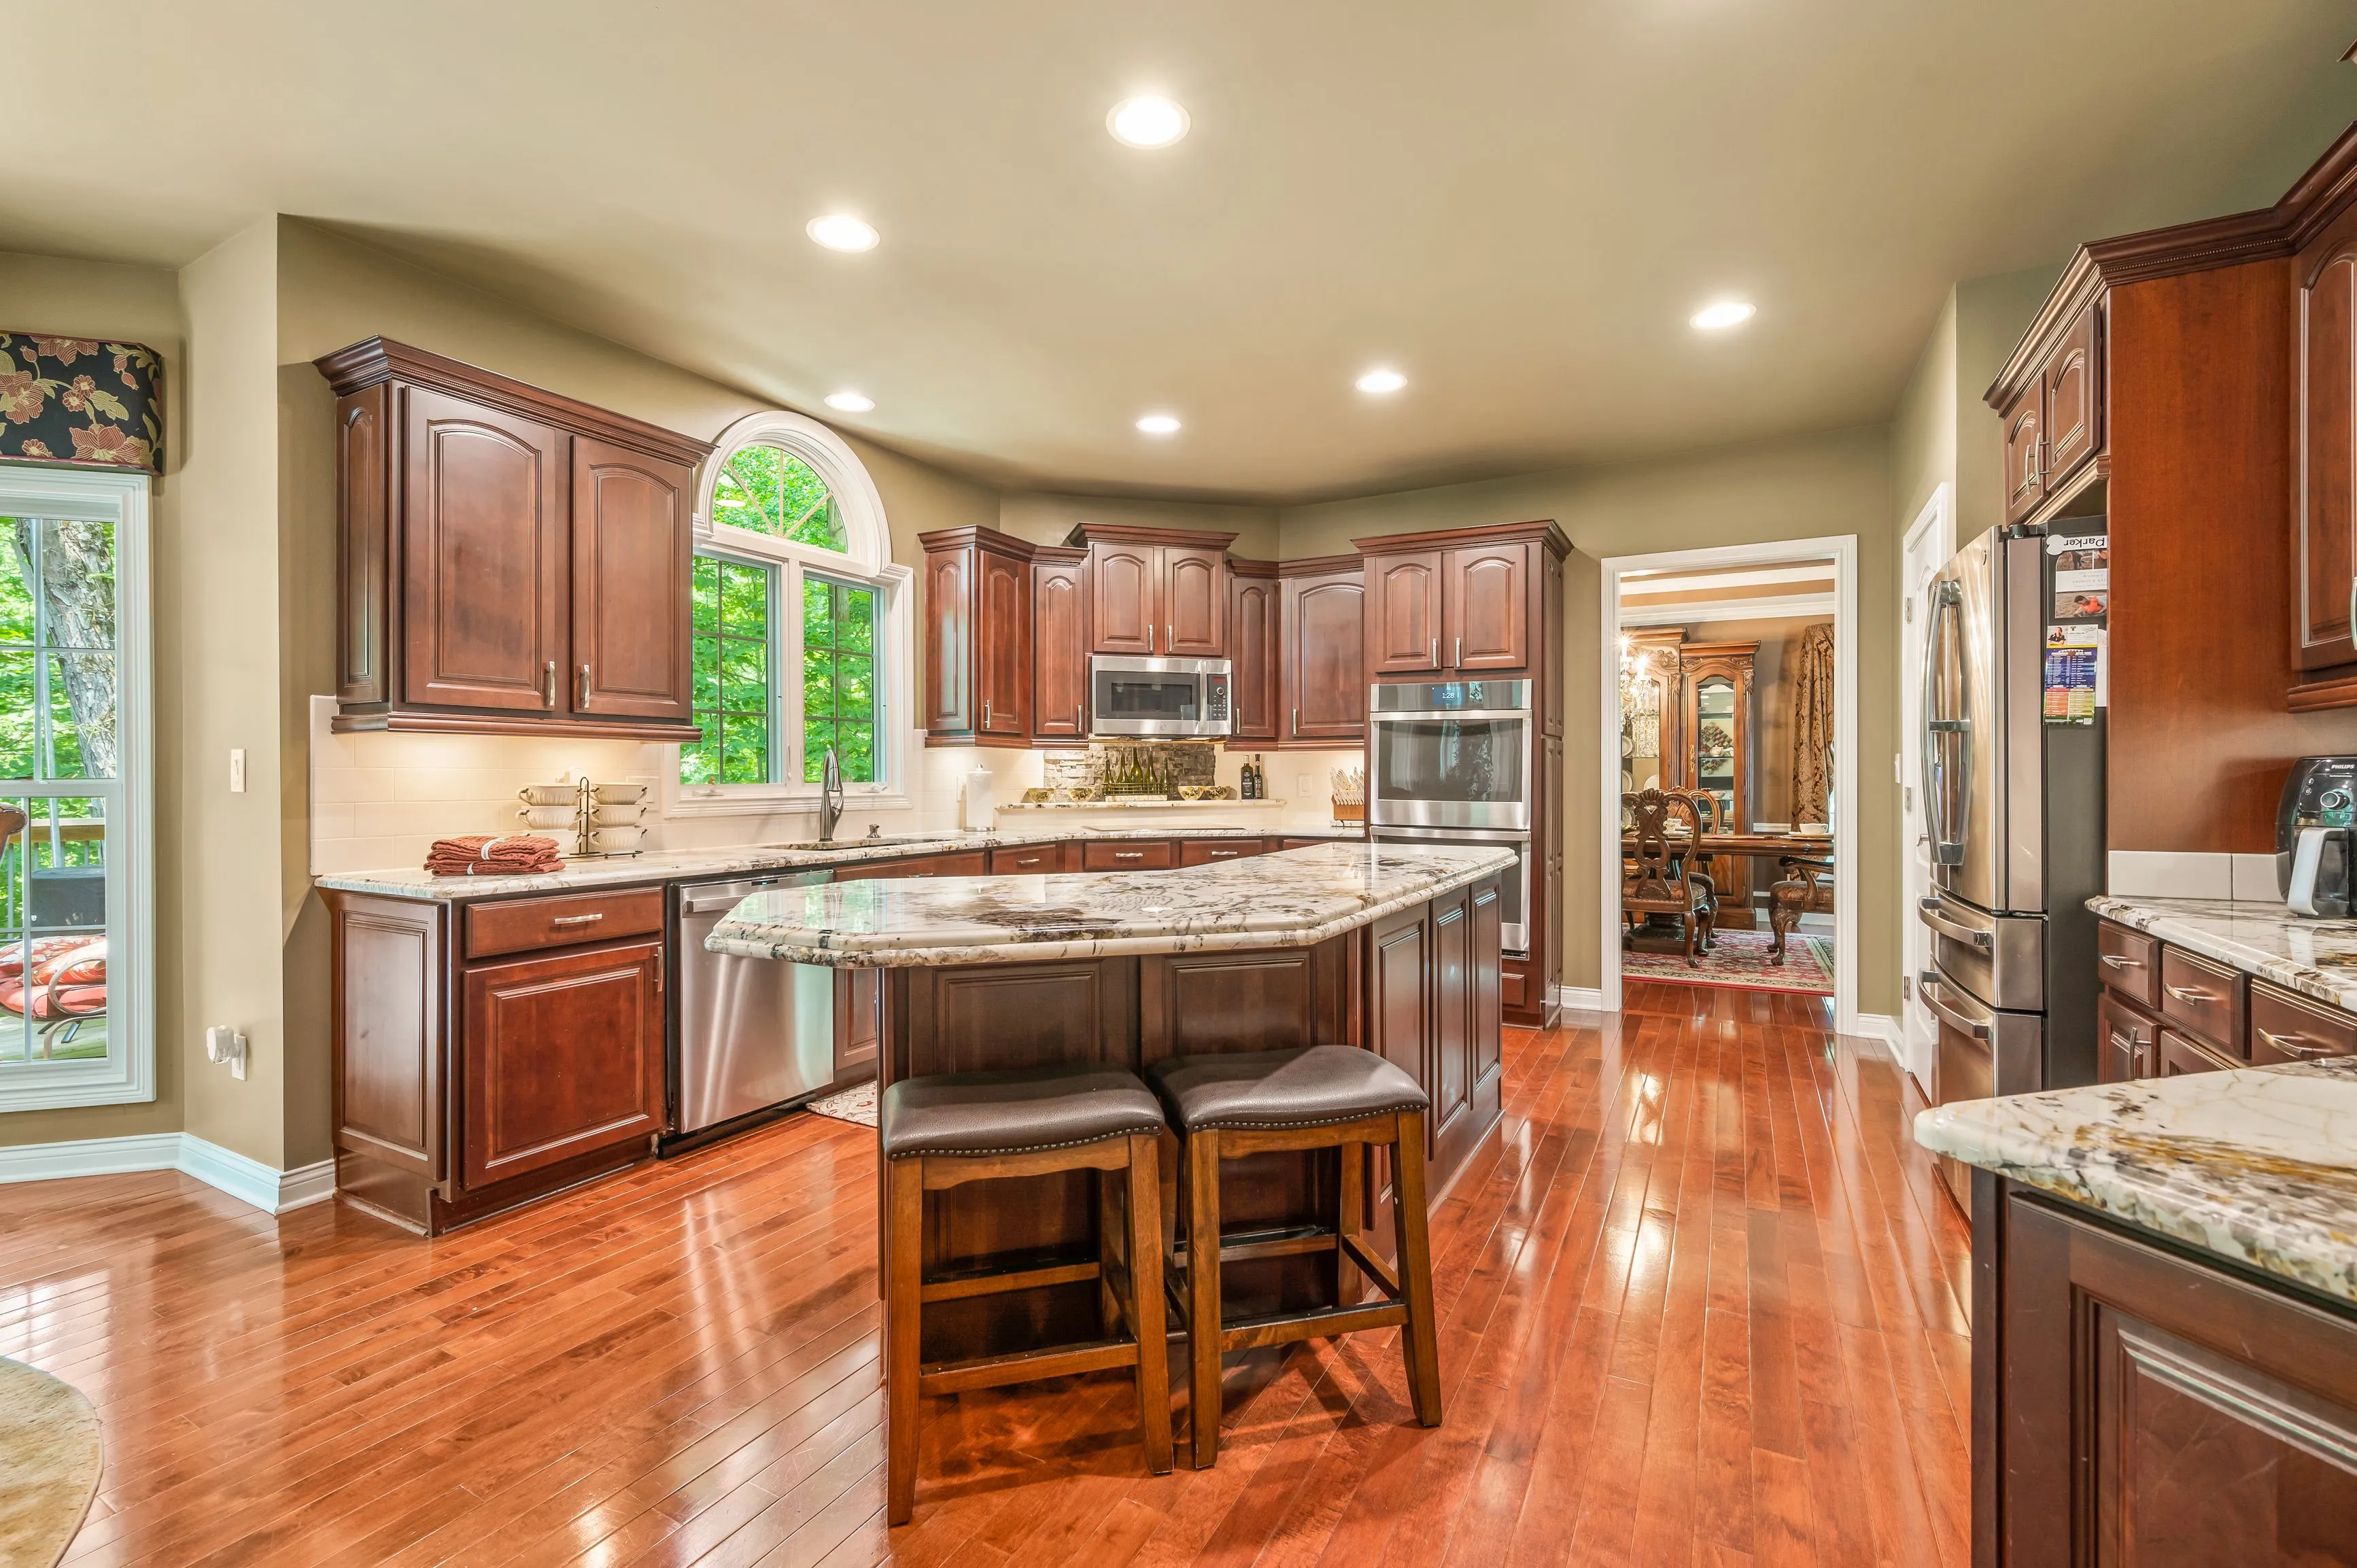 Spacious kitchen interior with polished hardwood floors, rich wooden cabinetry, and a central island with granite countertop.